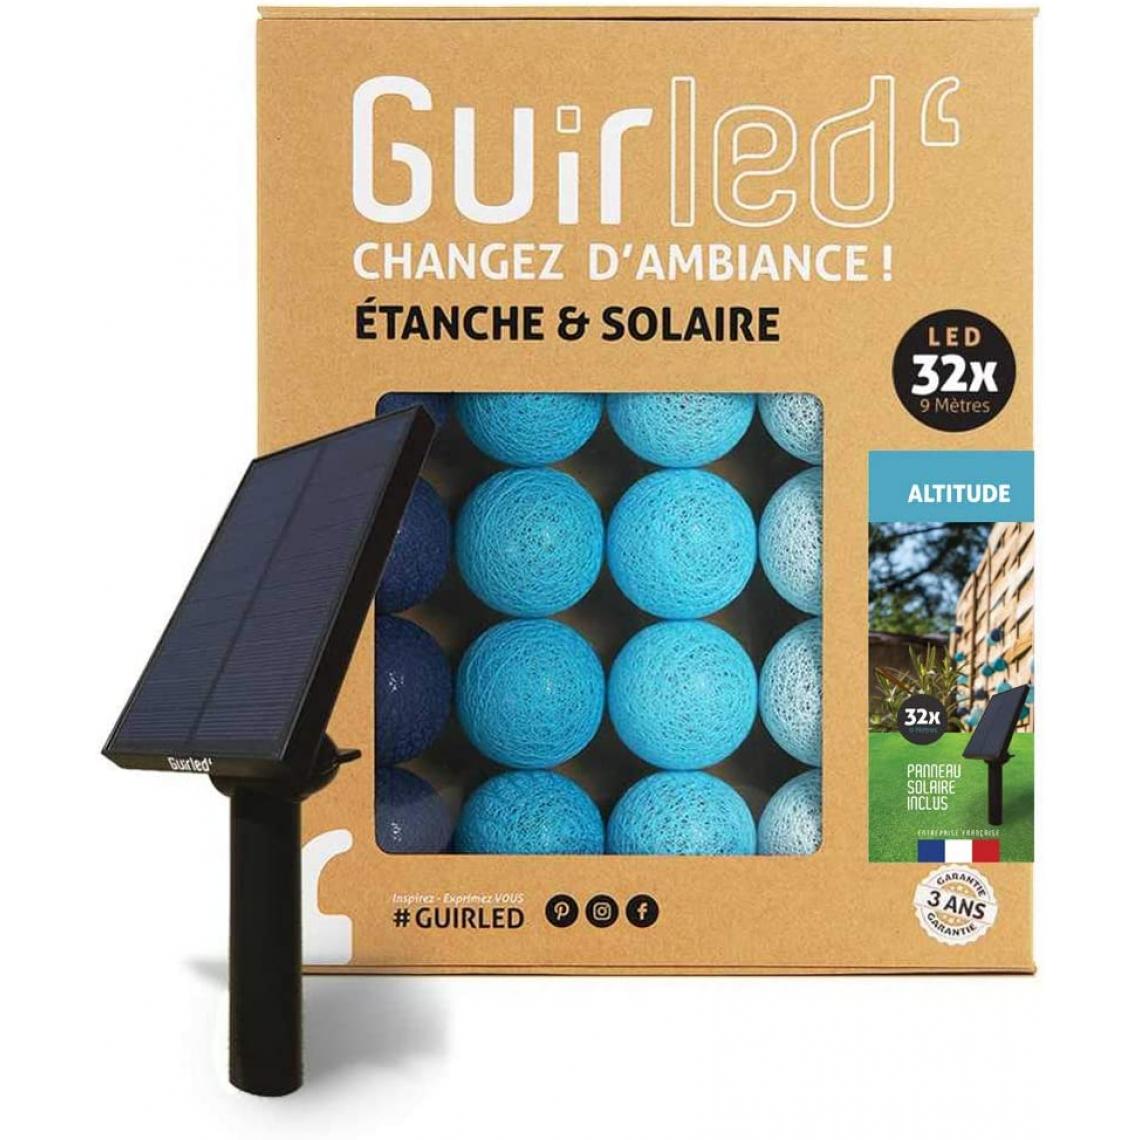 Guirled - Guirlande boule lumineuse 32 LED Outdoor - Altitude - Eclairage solaire